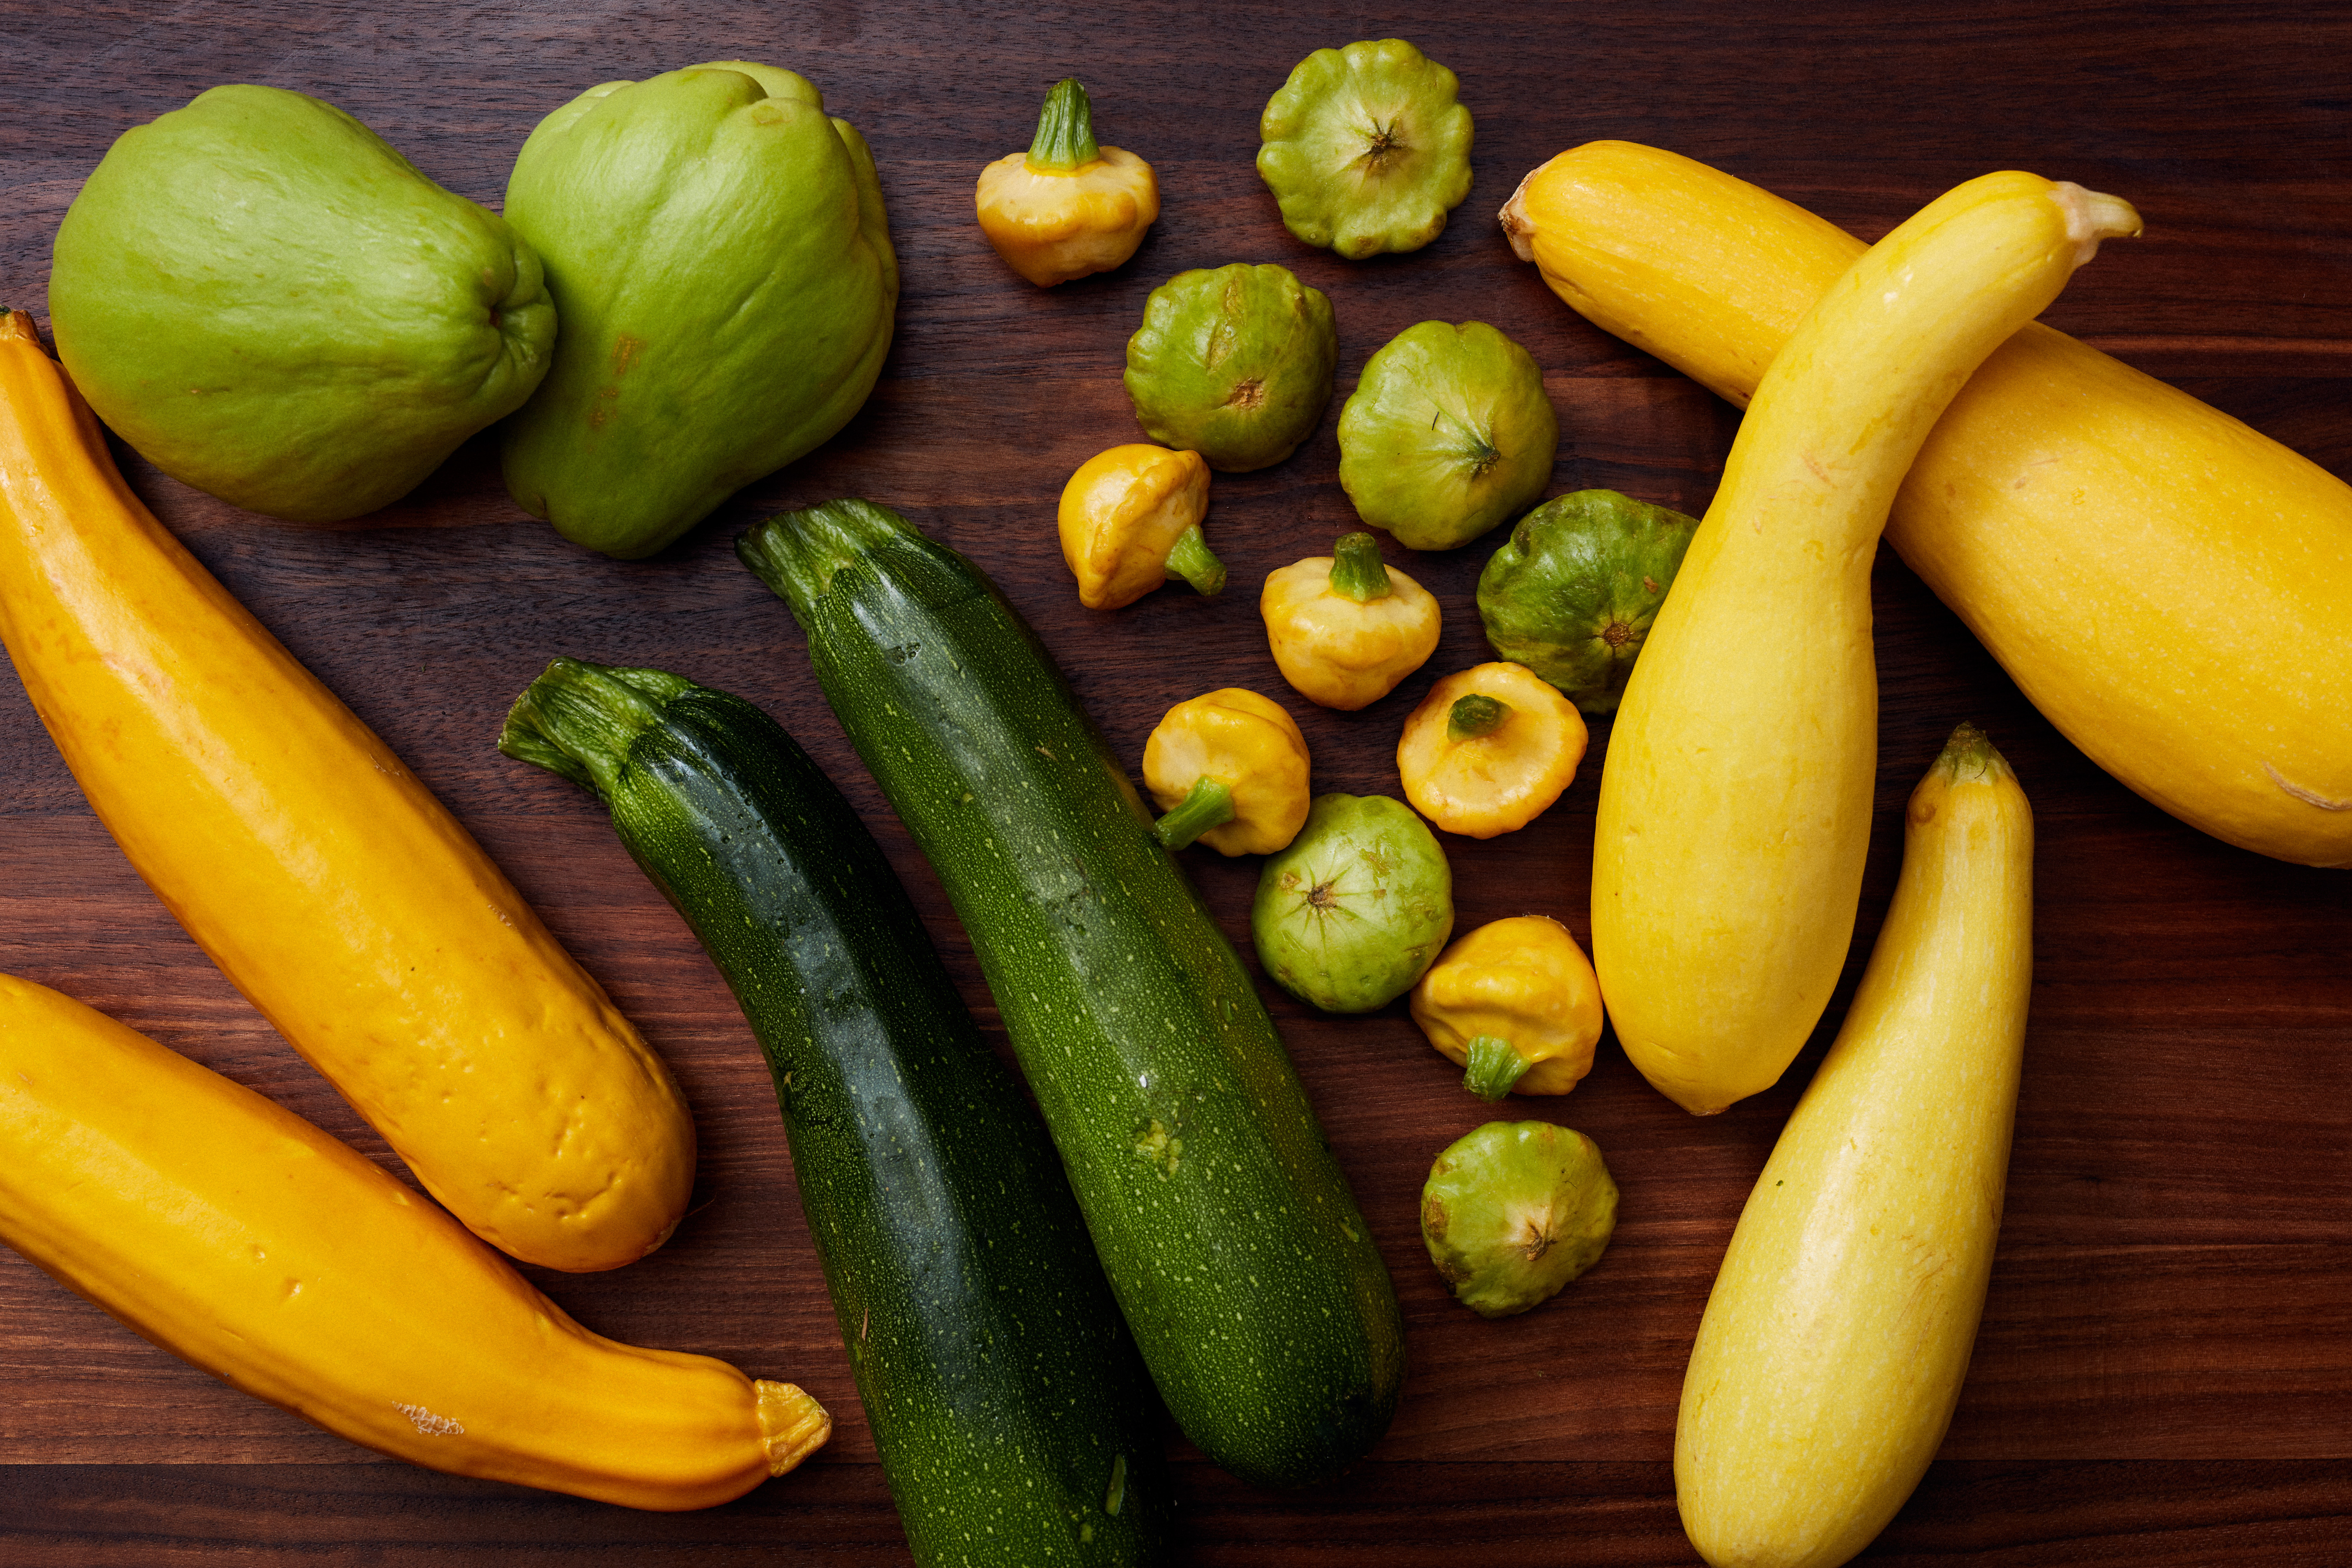 Types Of Summer Squash
 8 Types of Summer Squash to Buy at the Farmers Market